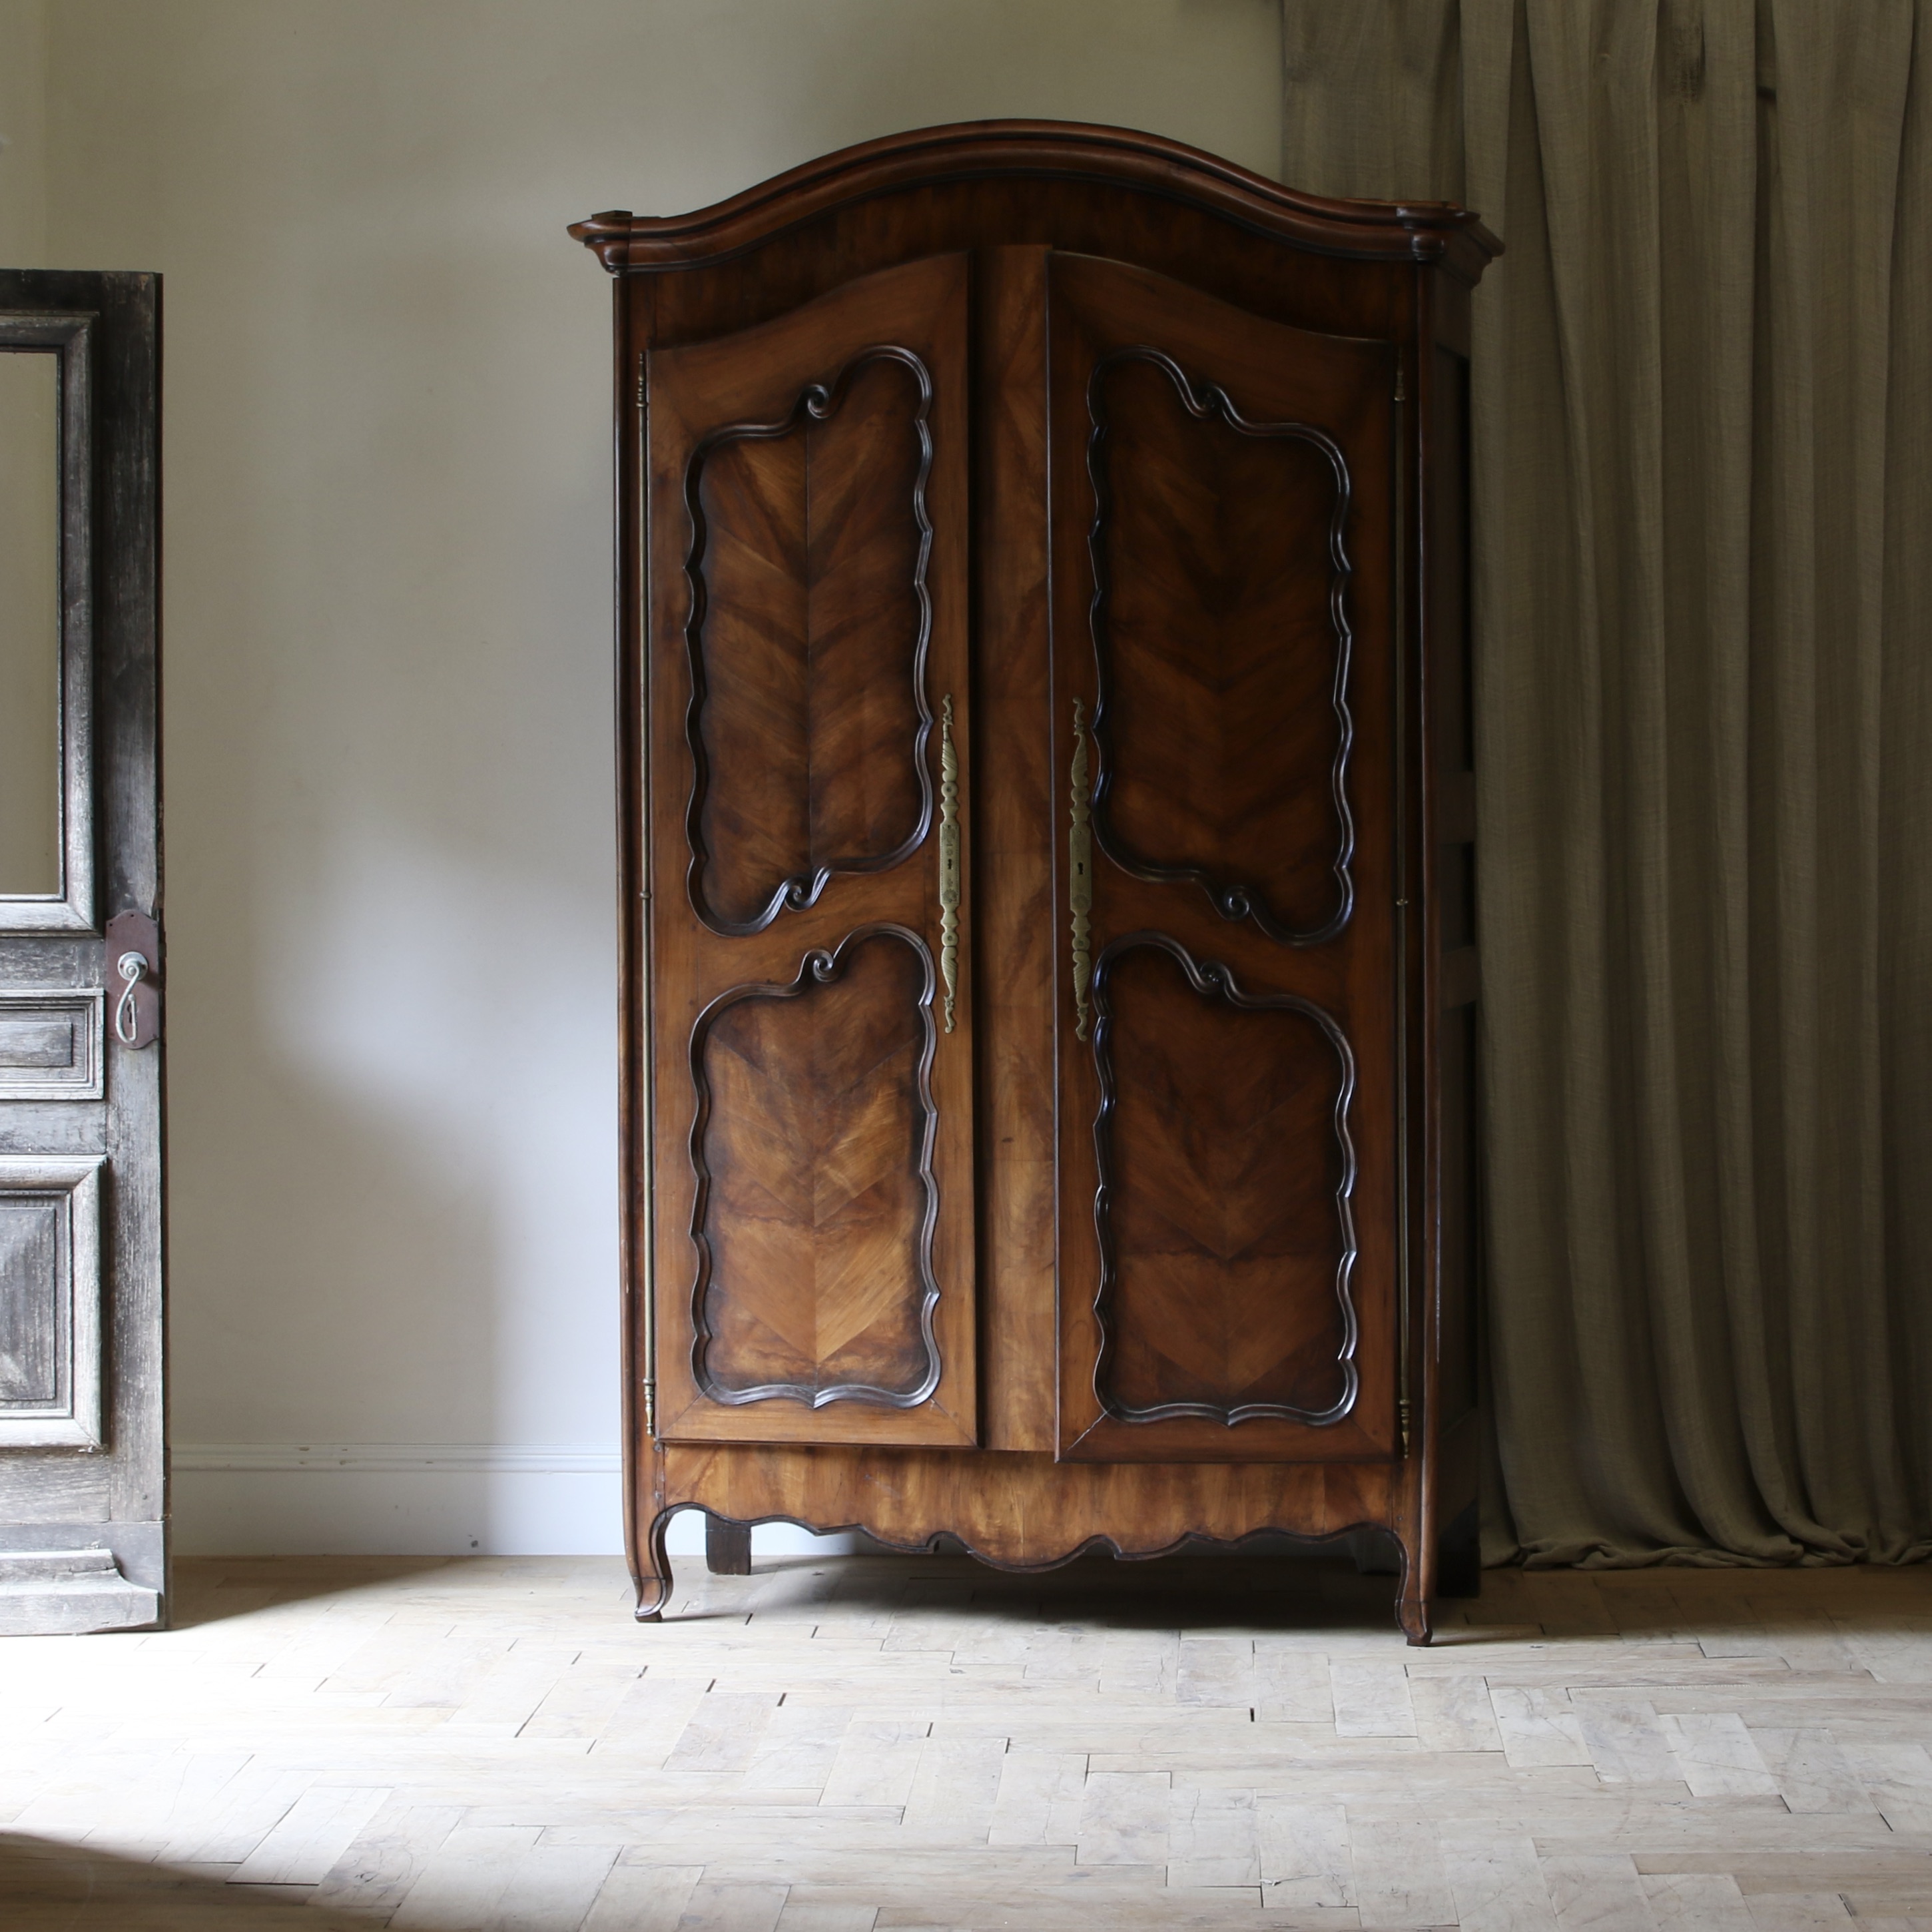 142-13 - Stunning French Armoire